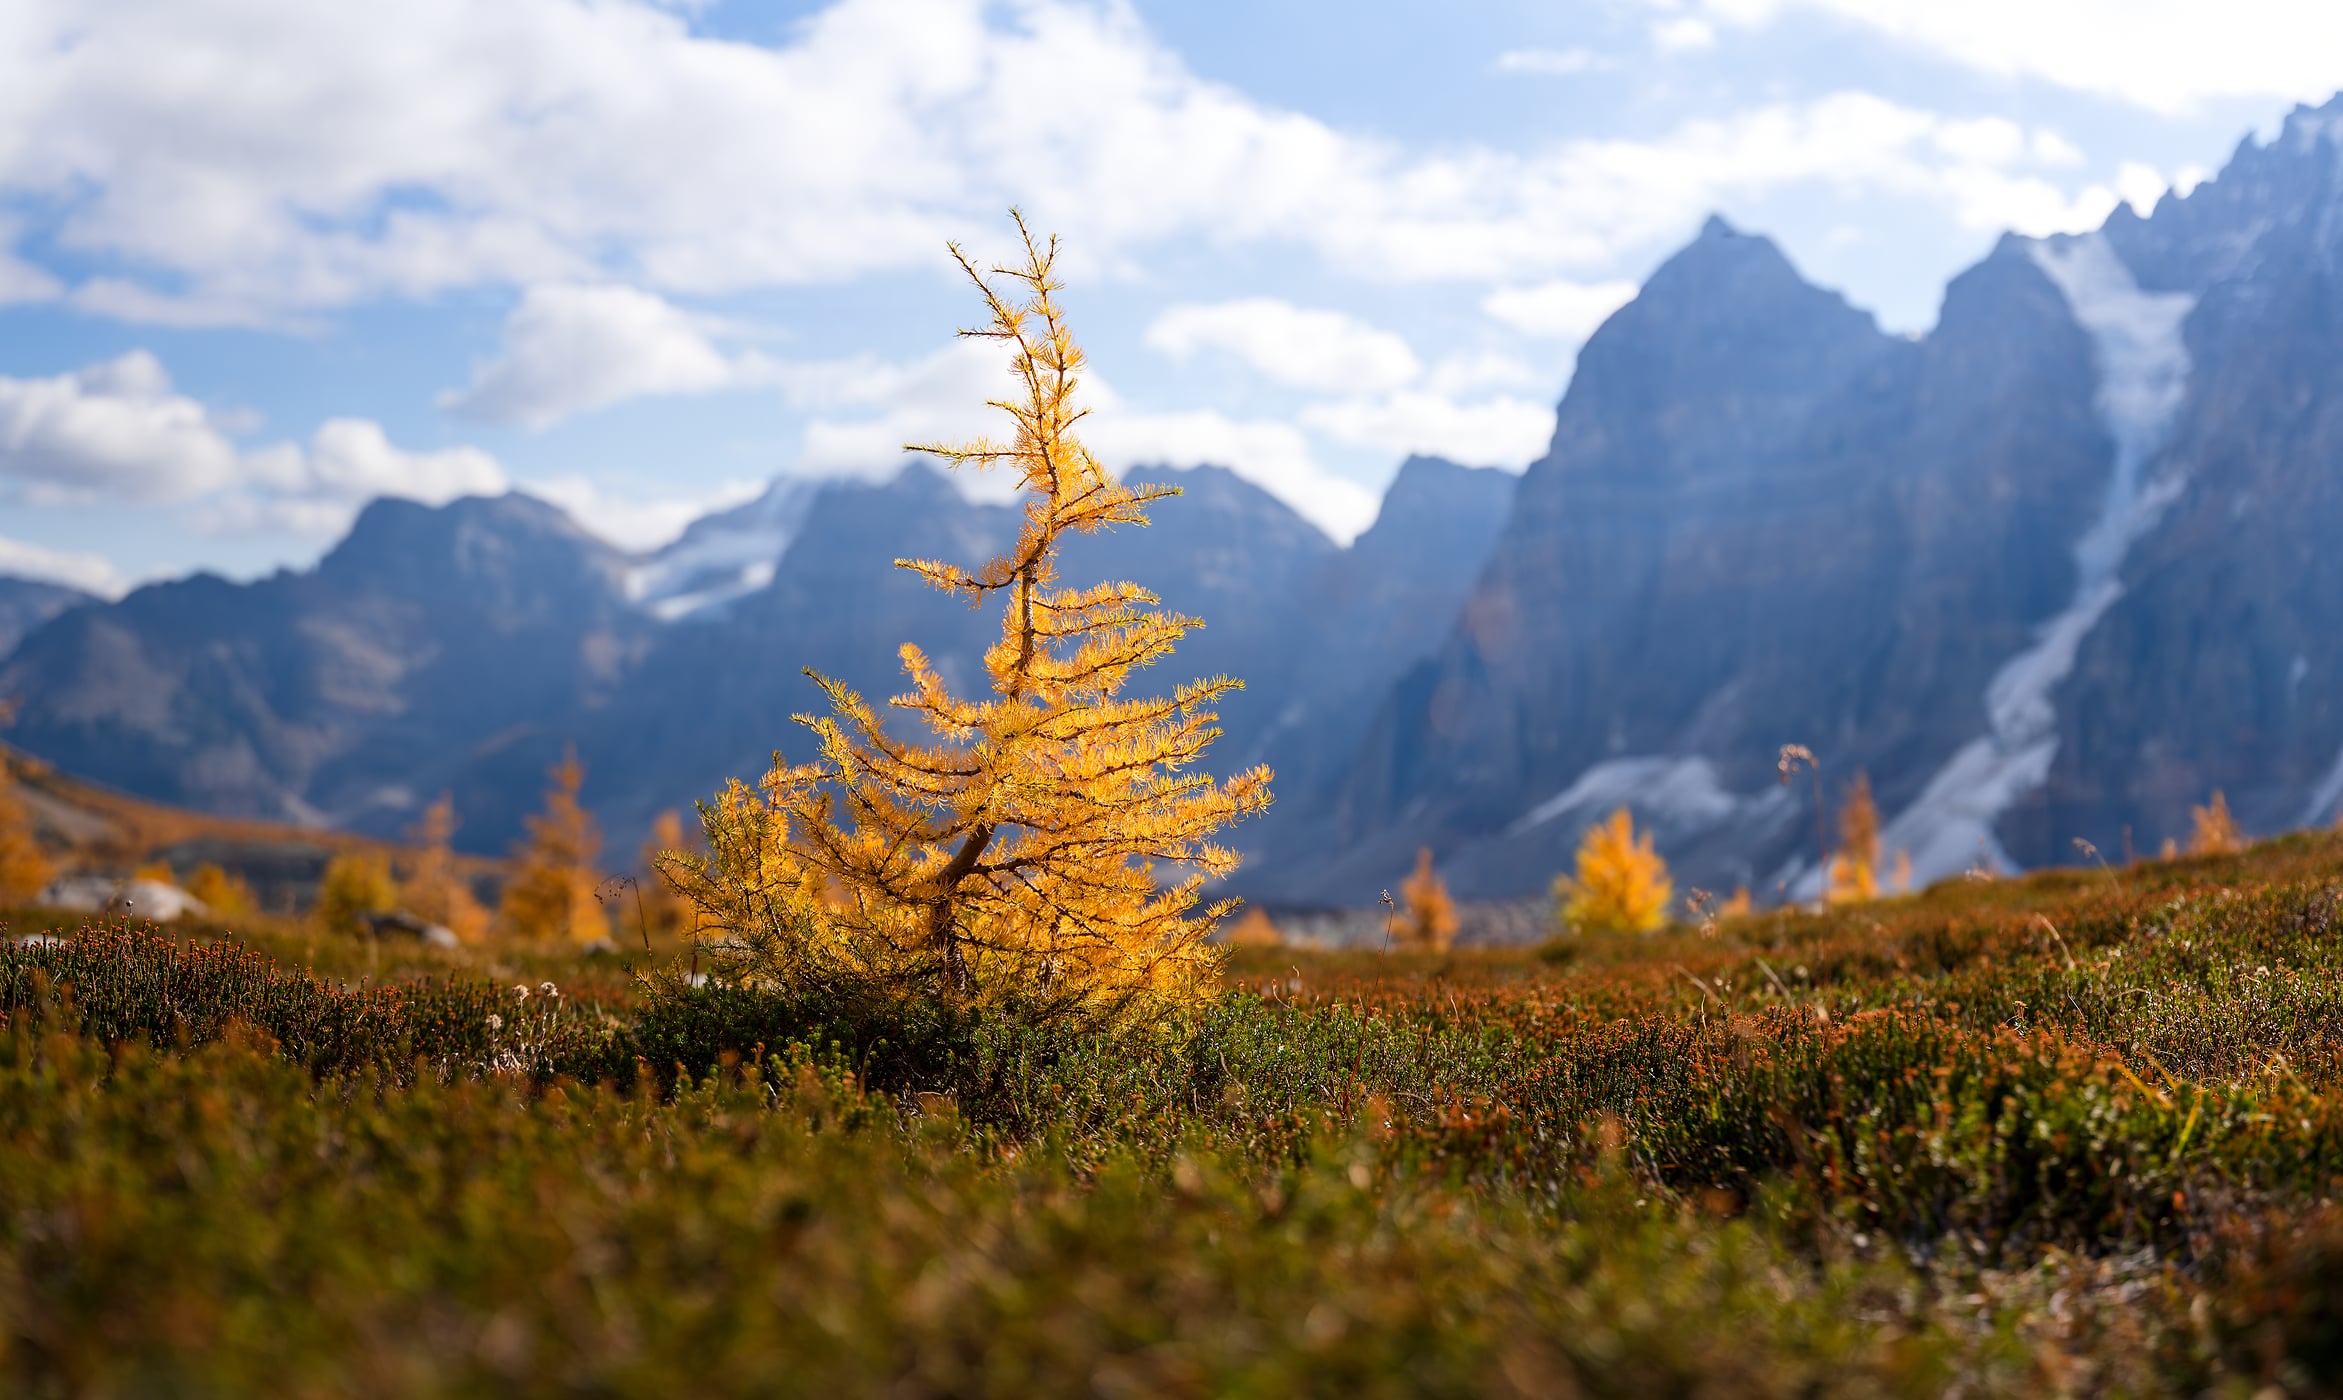 139 megapixels! A very high resolution, large-format VAST photo print of a small, determined pine tree growing in the mountains in autumn; nature photograph created by Jeff Lewis in Banff National Park, Canada.